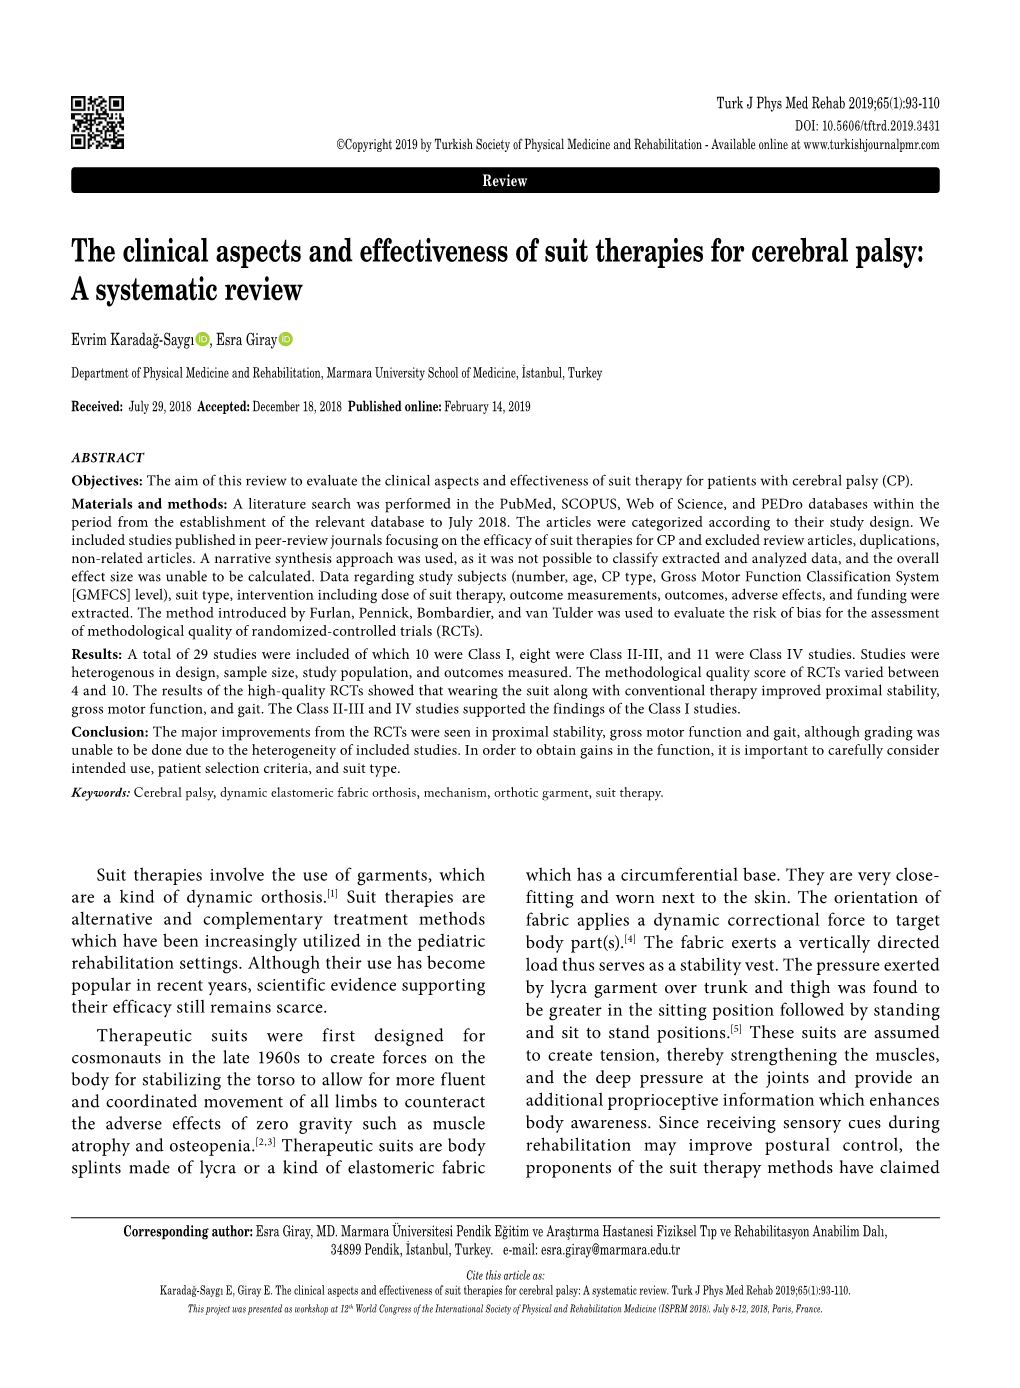 The Clinical Aspects and Effectiveness of Suit Therapies for Cerebral Palsy: a Systematic Review